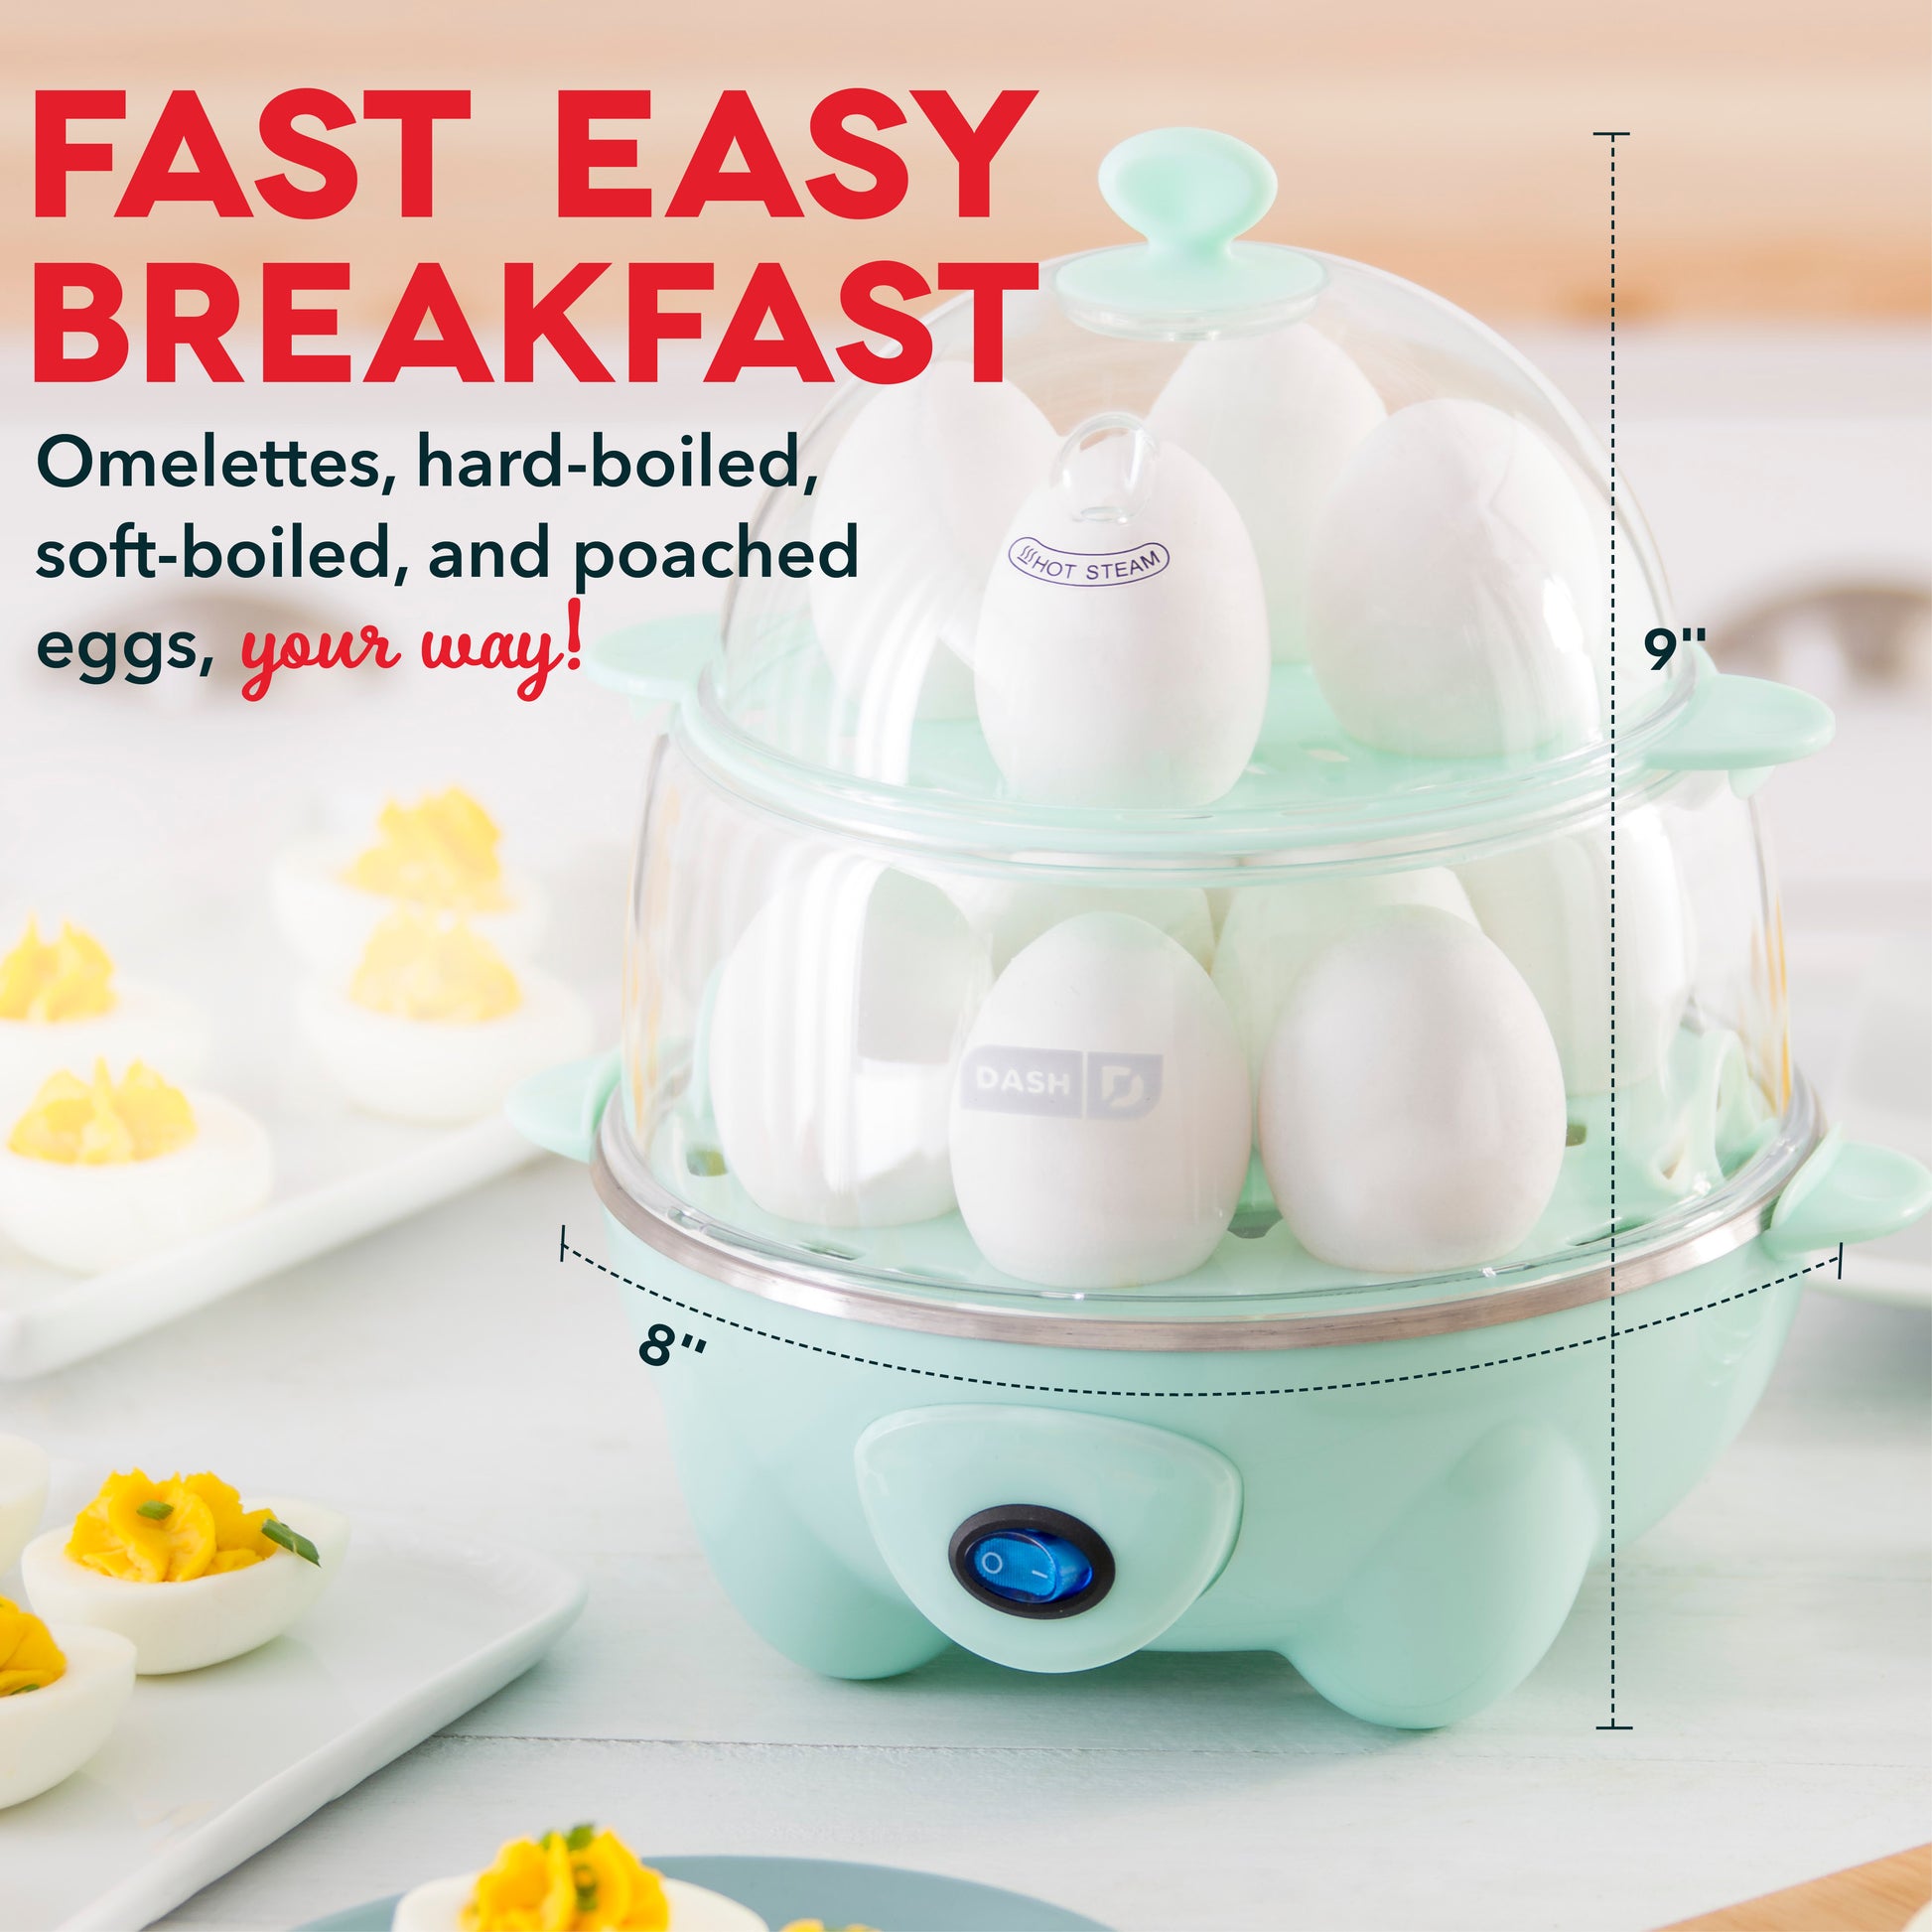 This Egg Cooker Makes Boiled Eggs At the Press of a Button